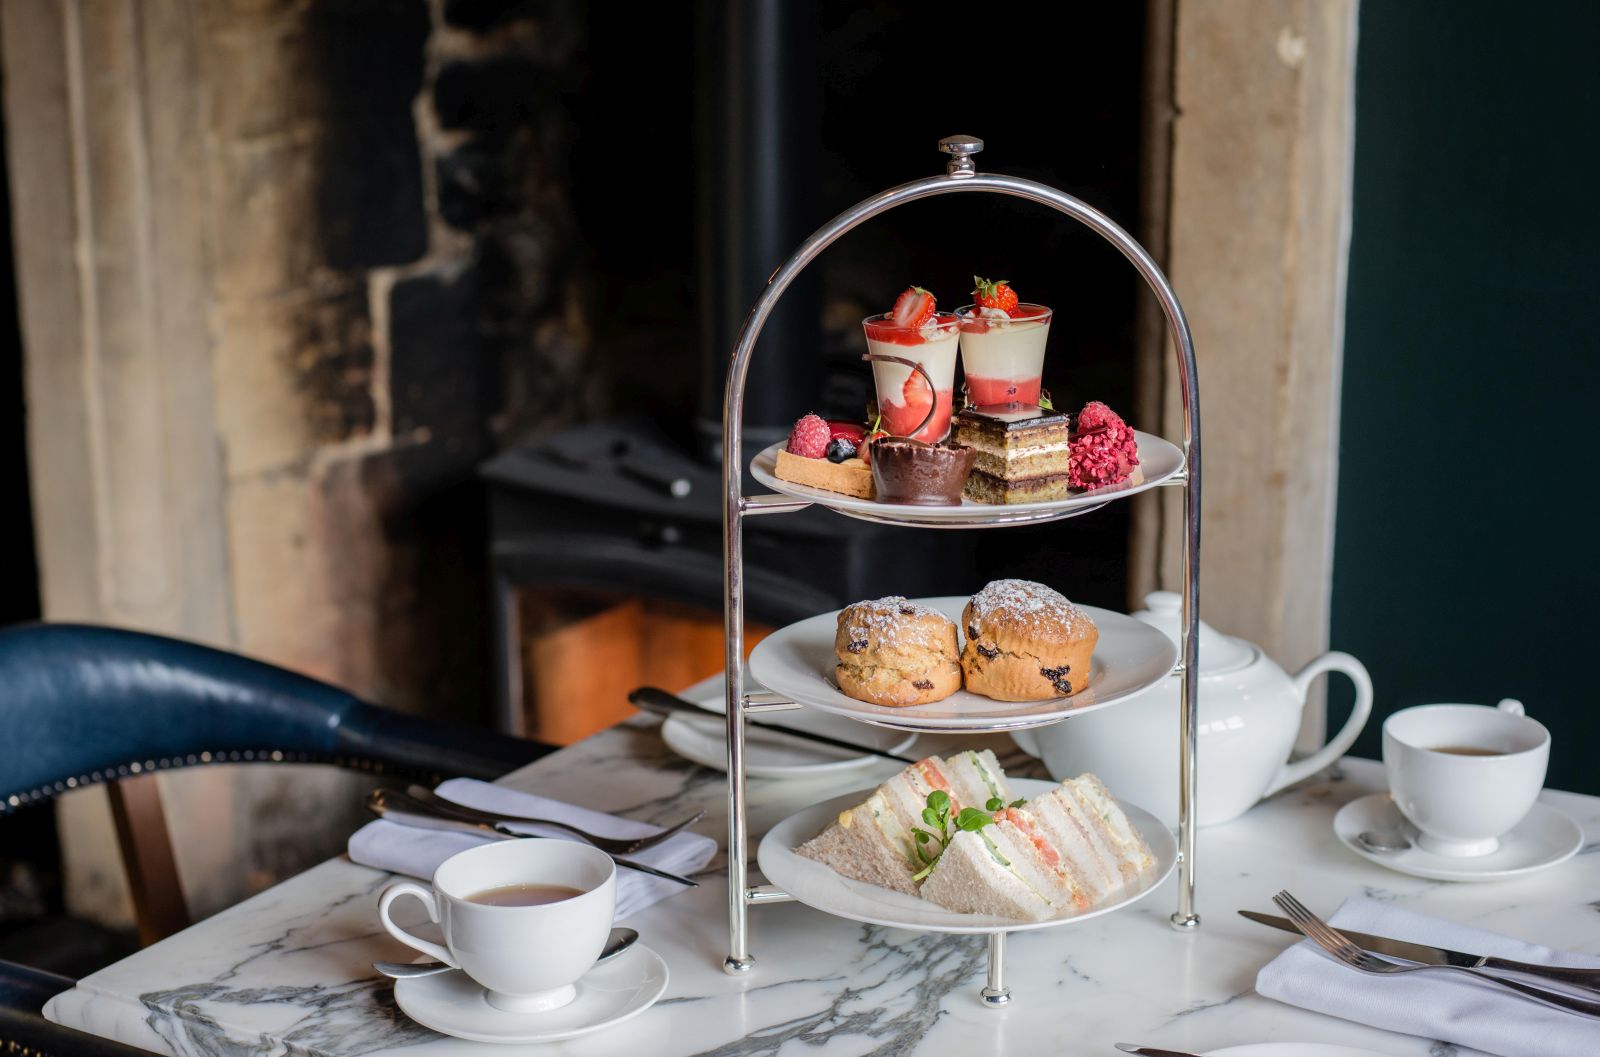 Afternoon tea at The Lygon Arms in the Cotswolds, England